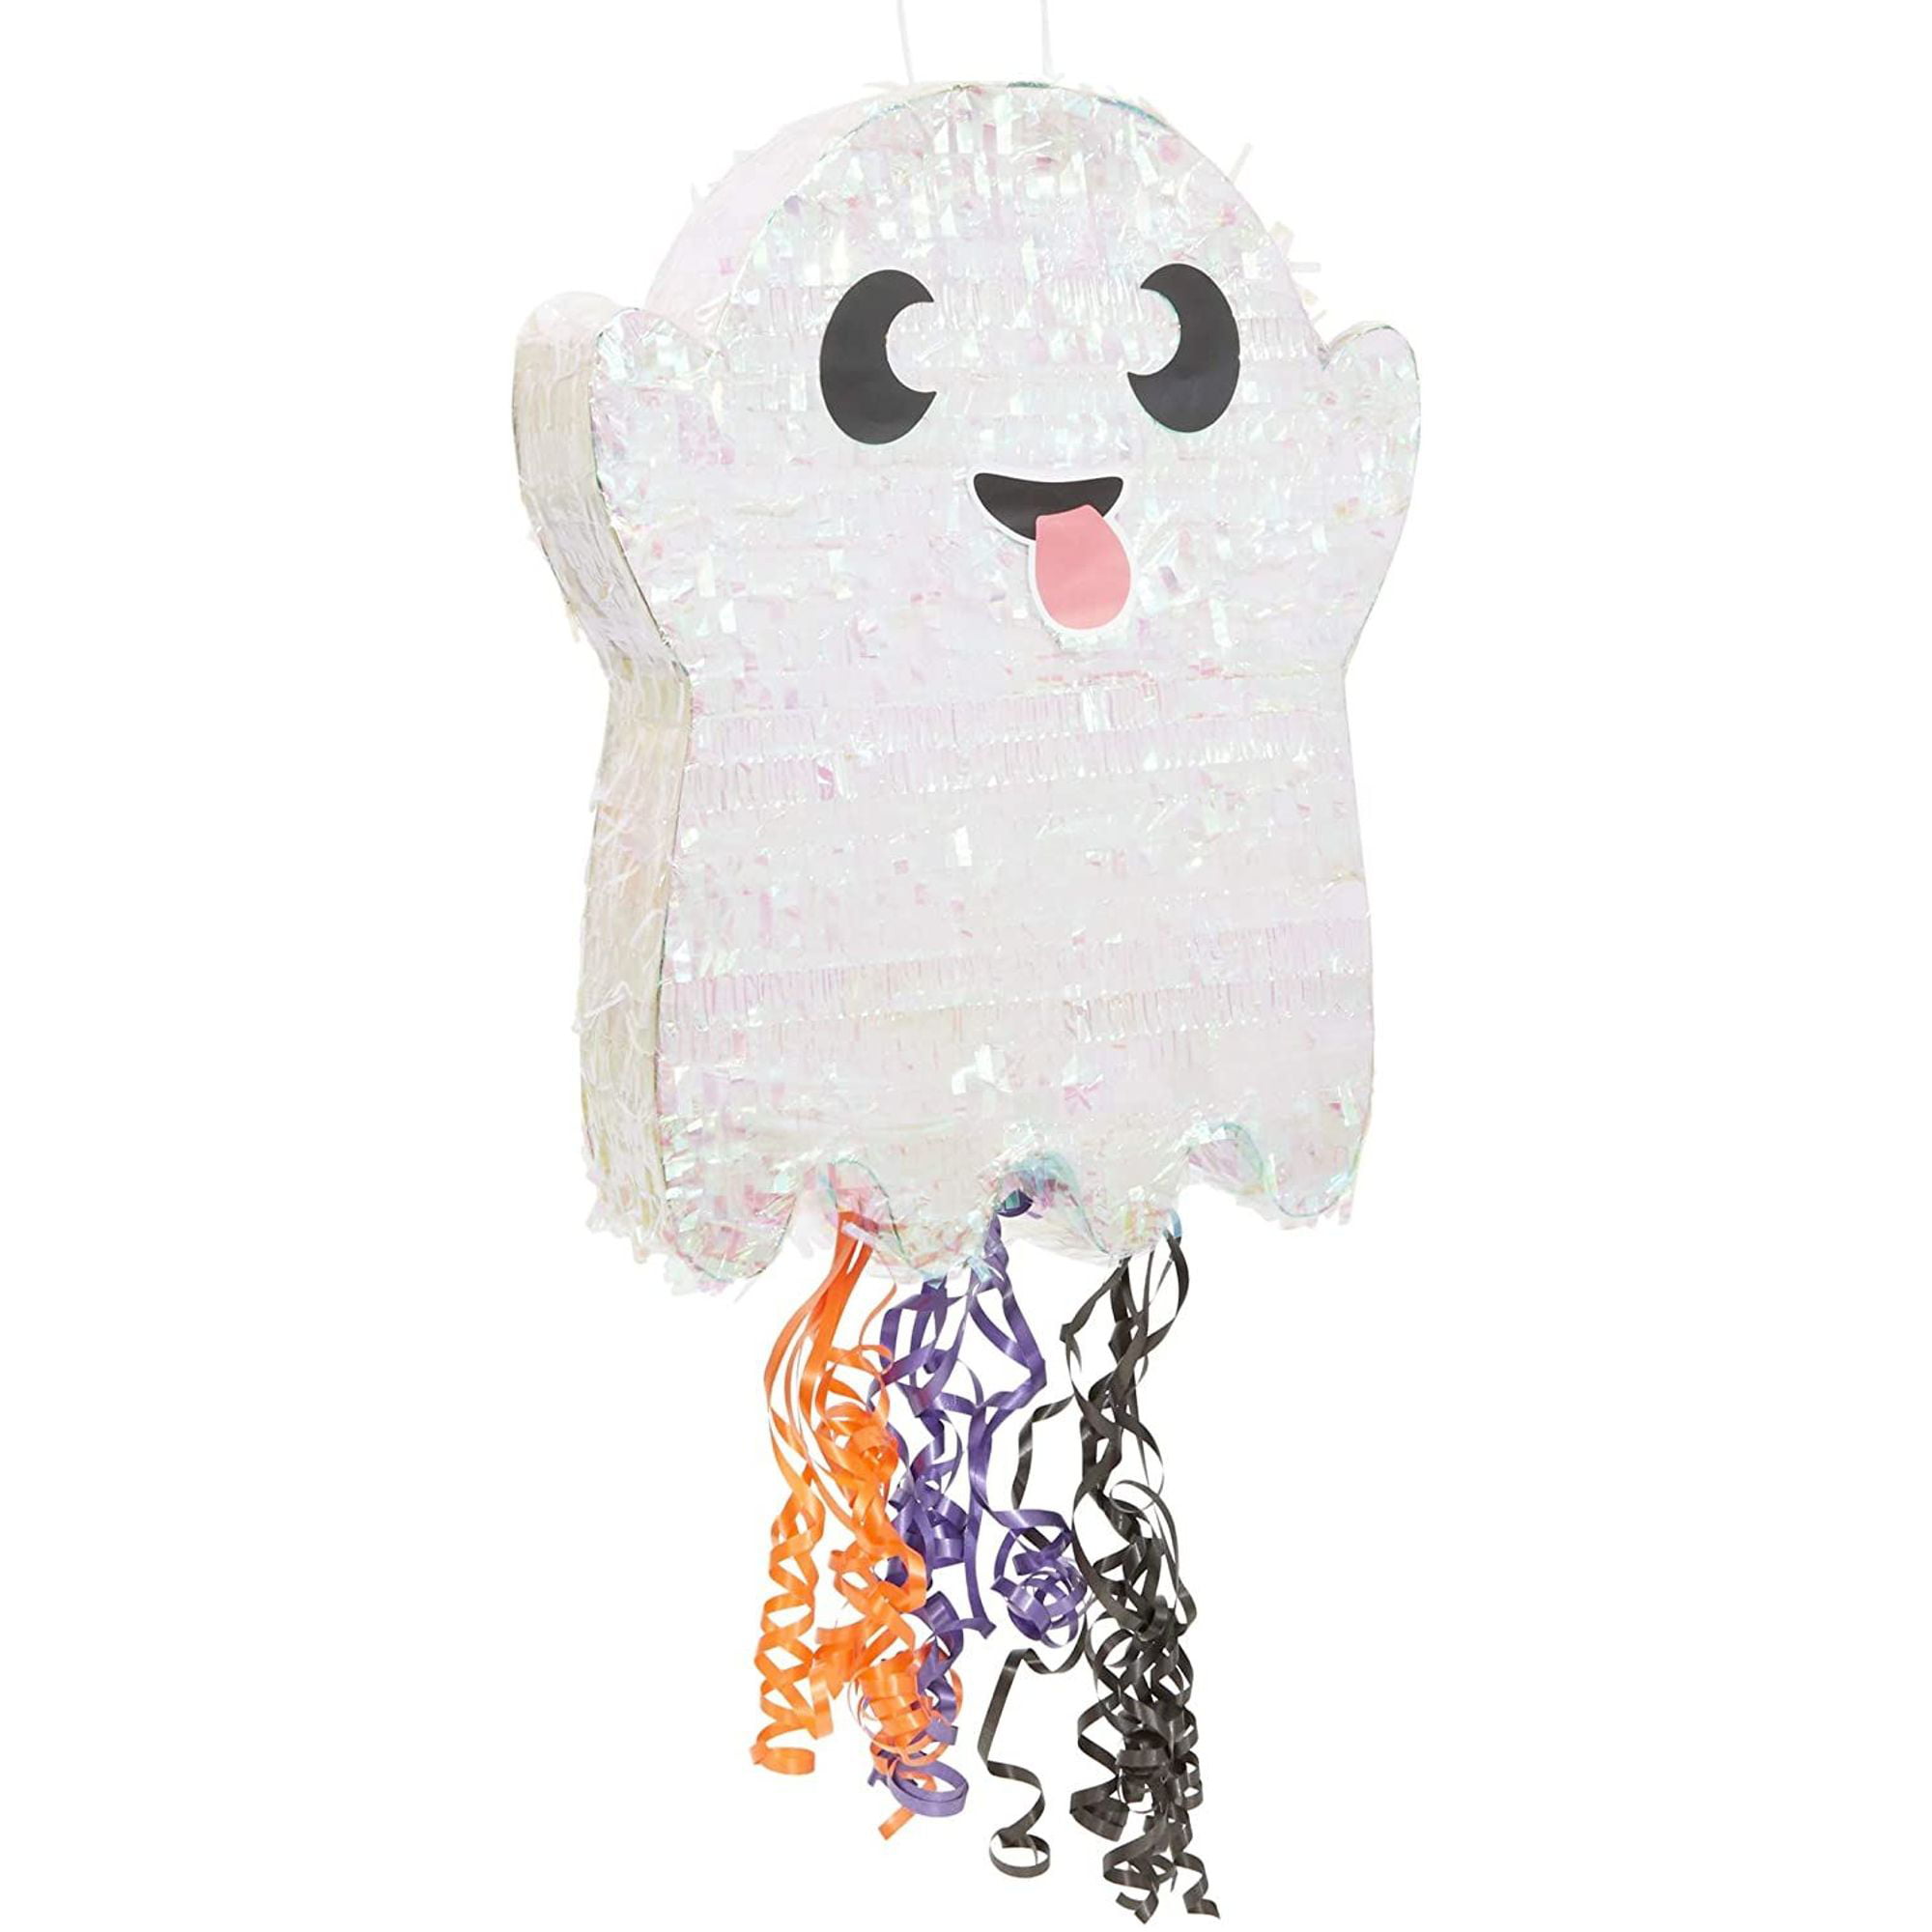 Fiesta Star Ghost with Hat Pinata